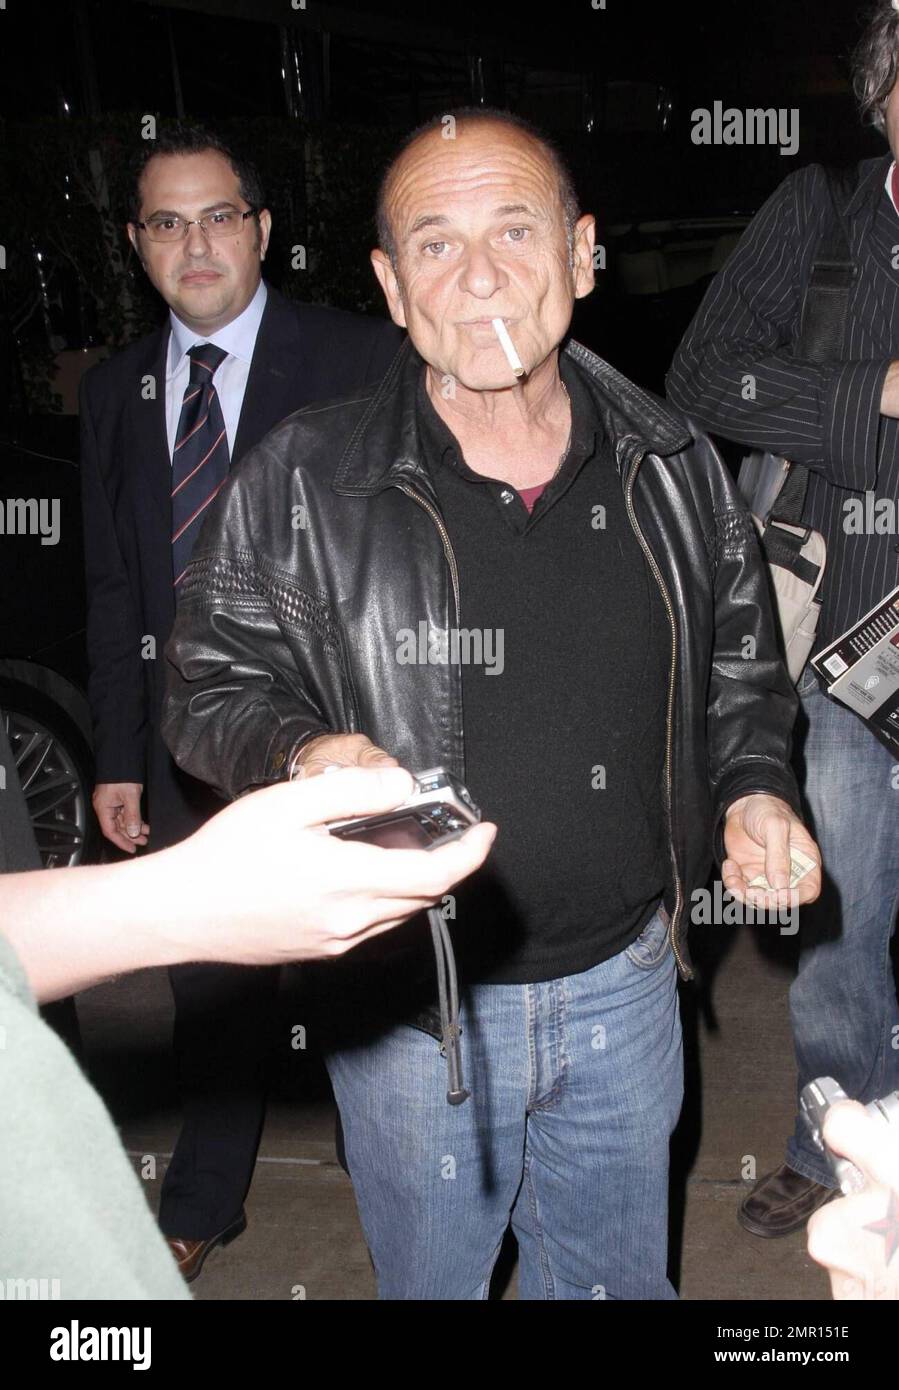 Exclusive!! Joe Pesci and Angie Everhart leave the restaurant AGO. Everhart makes her way quickly to the waiting car, hiding her face as much as possible, but Pesci smokes a cigarette while signing autographs and taking photos with fans. Los Angeles, CA. 10/21/08. Stock Photo